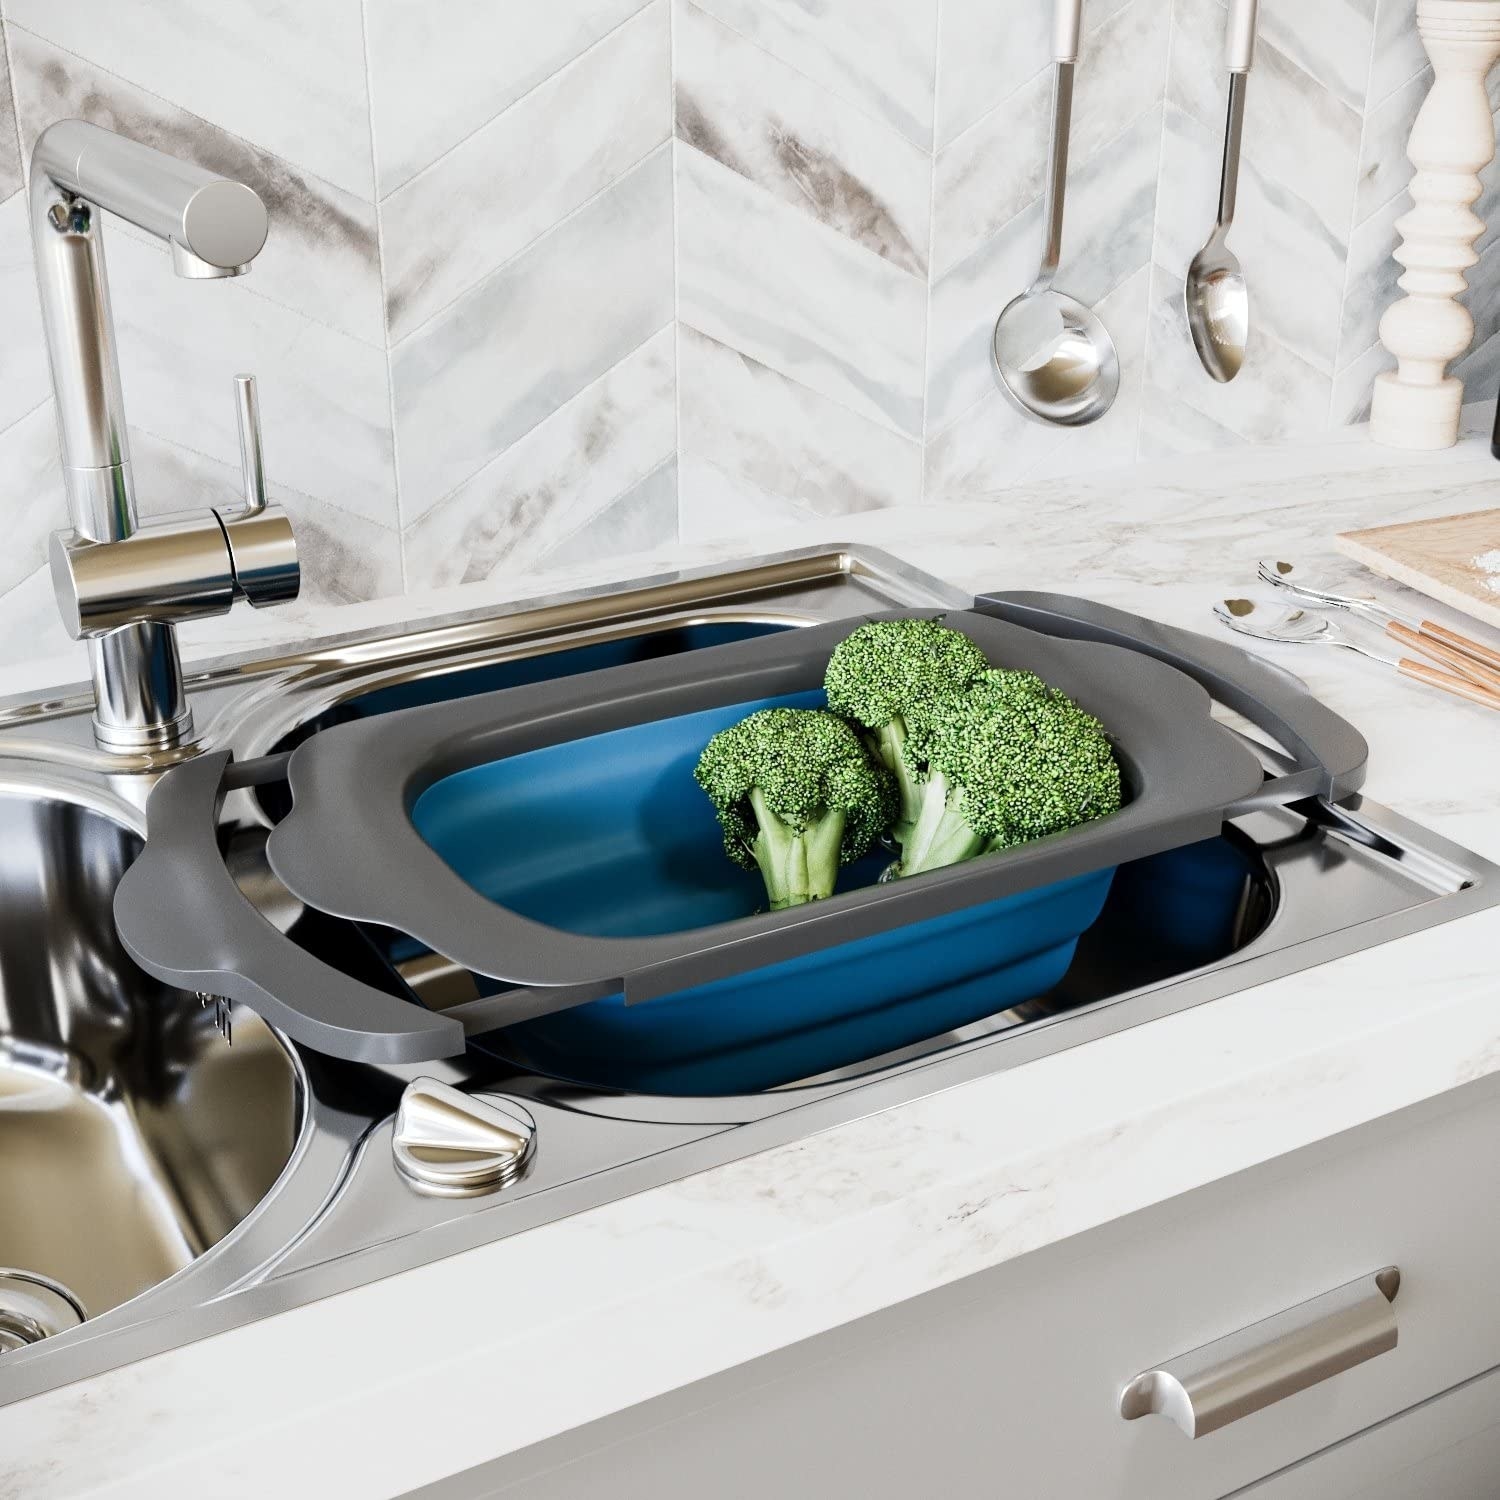 A colander with broccoli in it over a sink